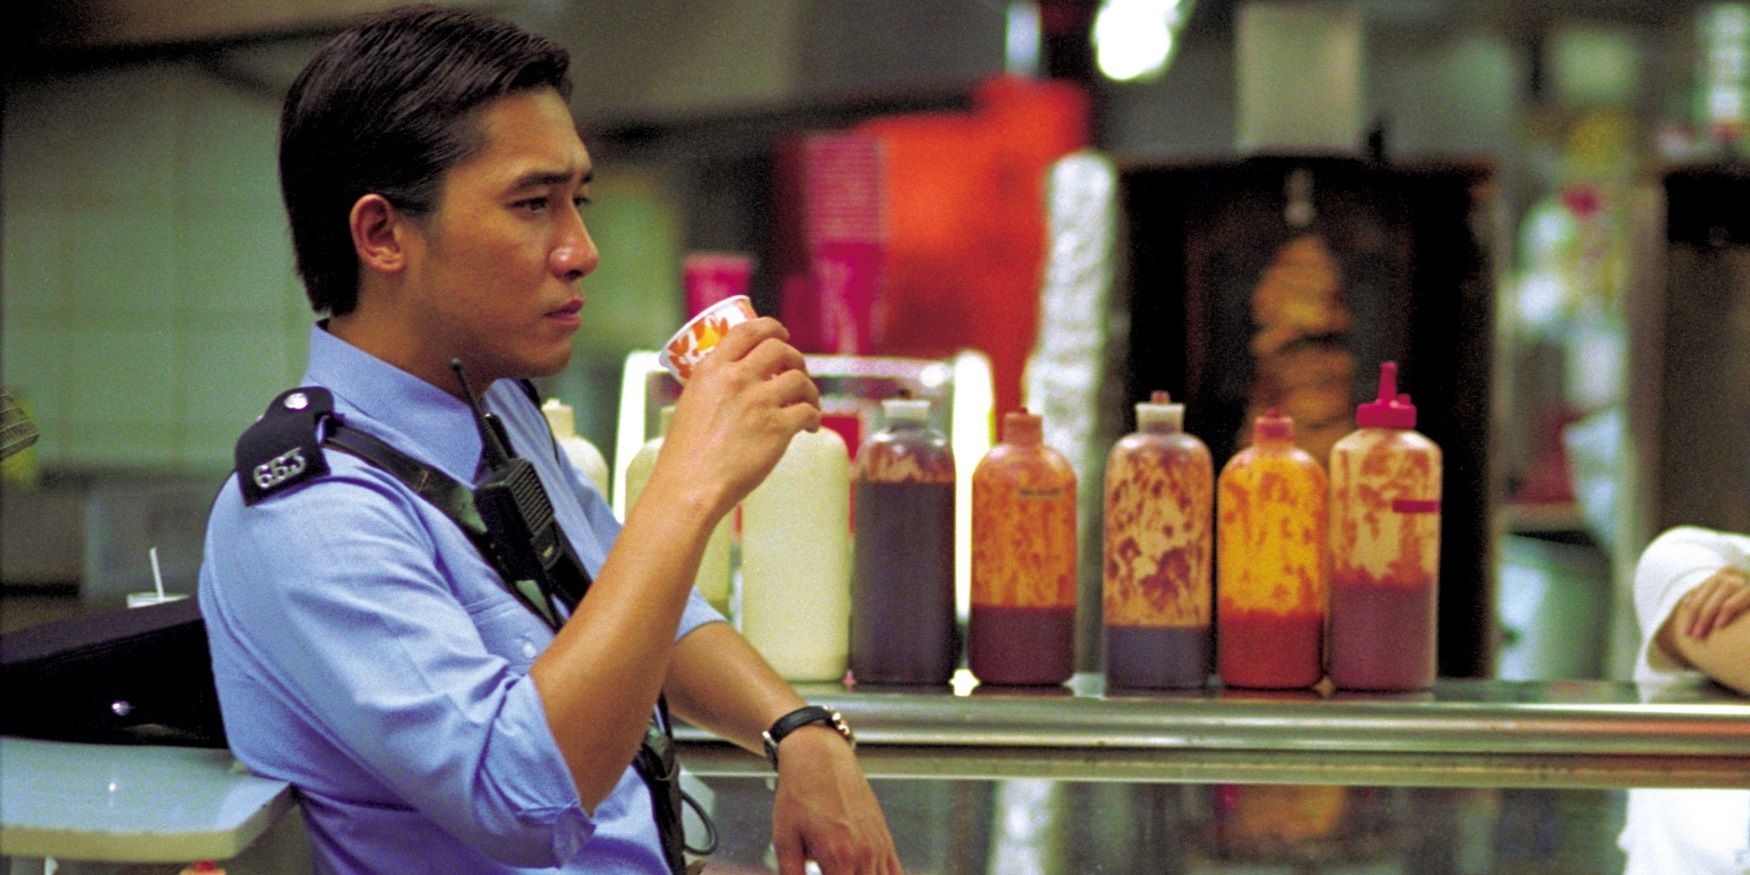 A policeman at a fast food place in Chungking Express